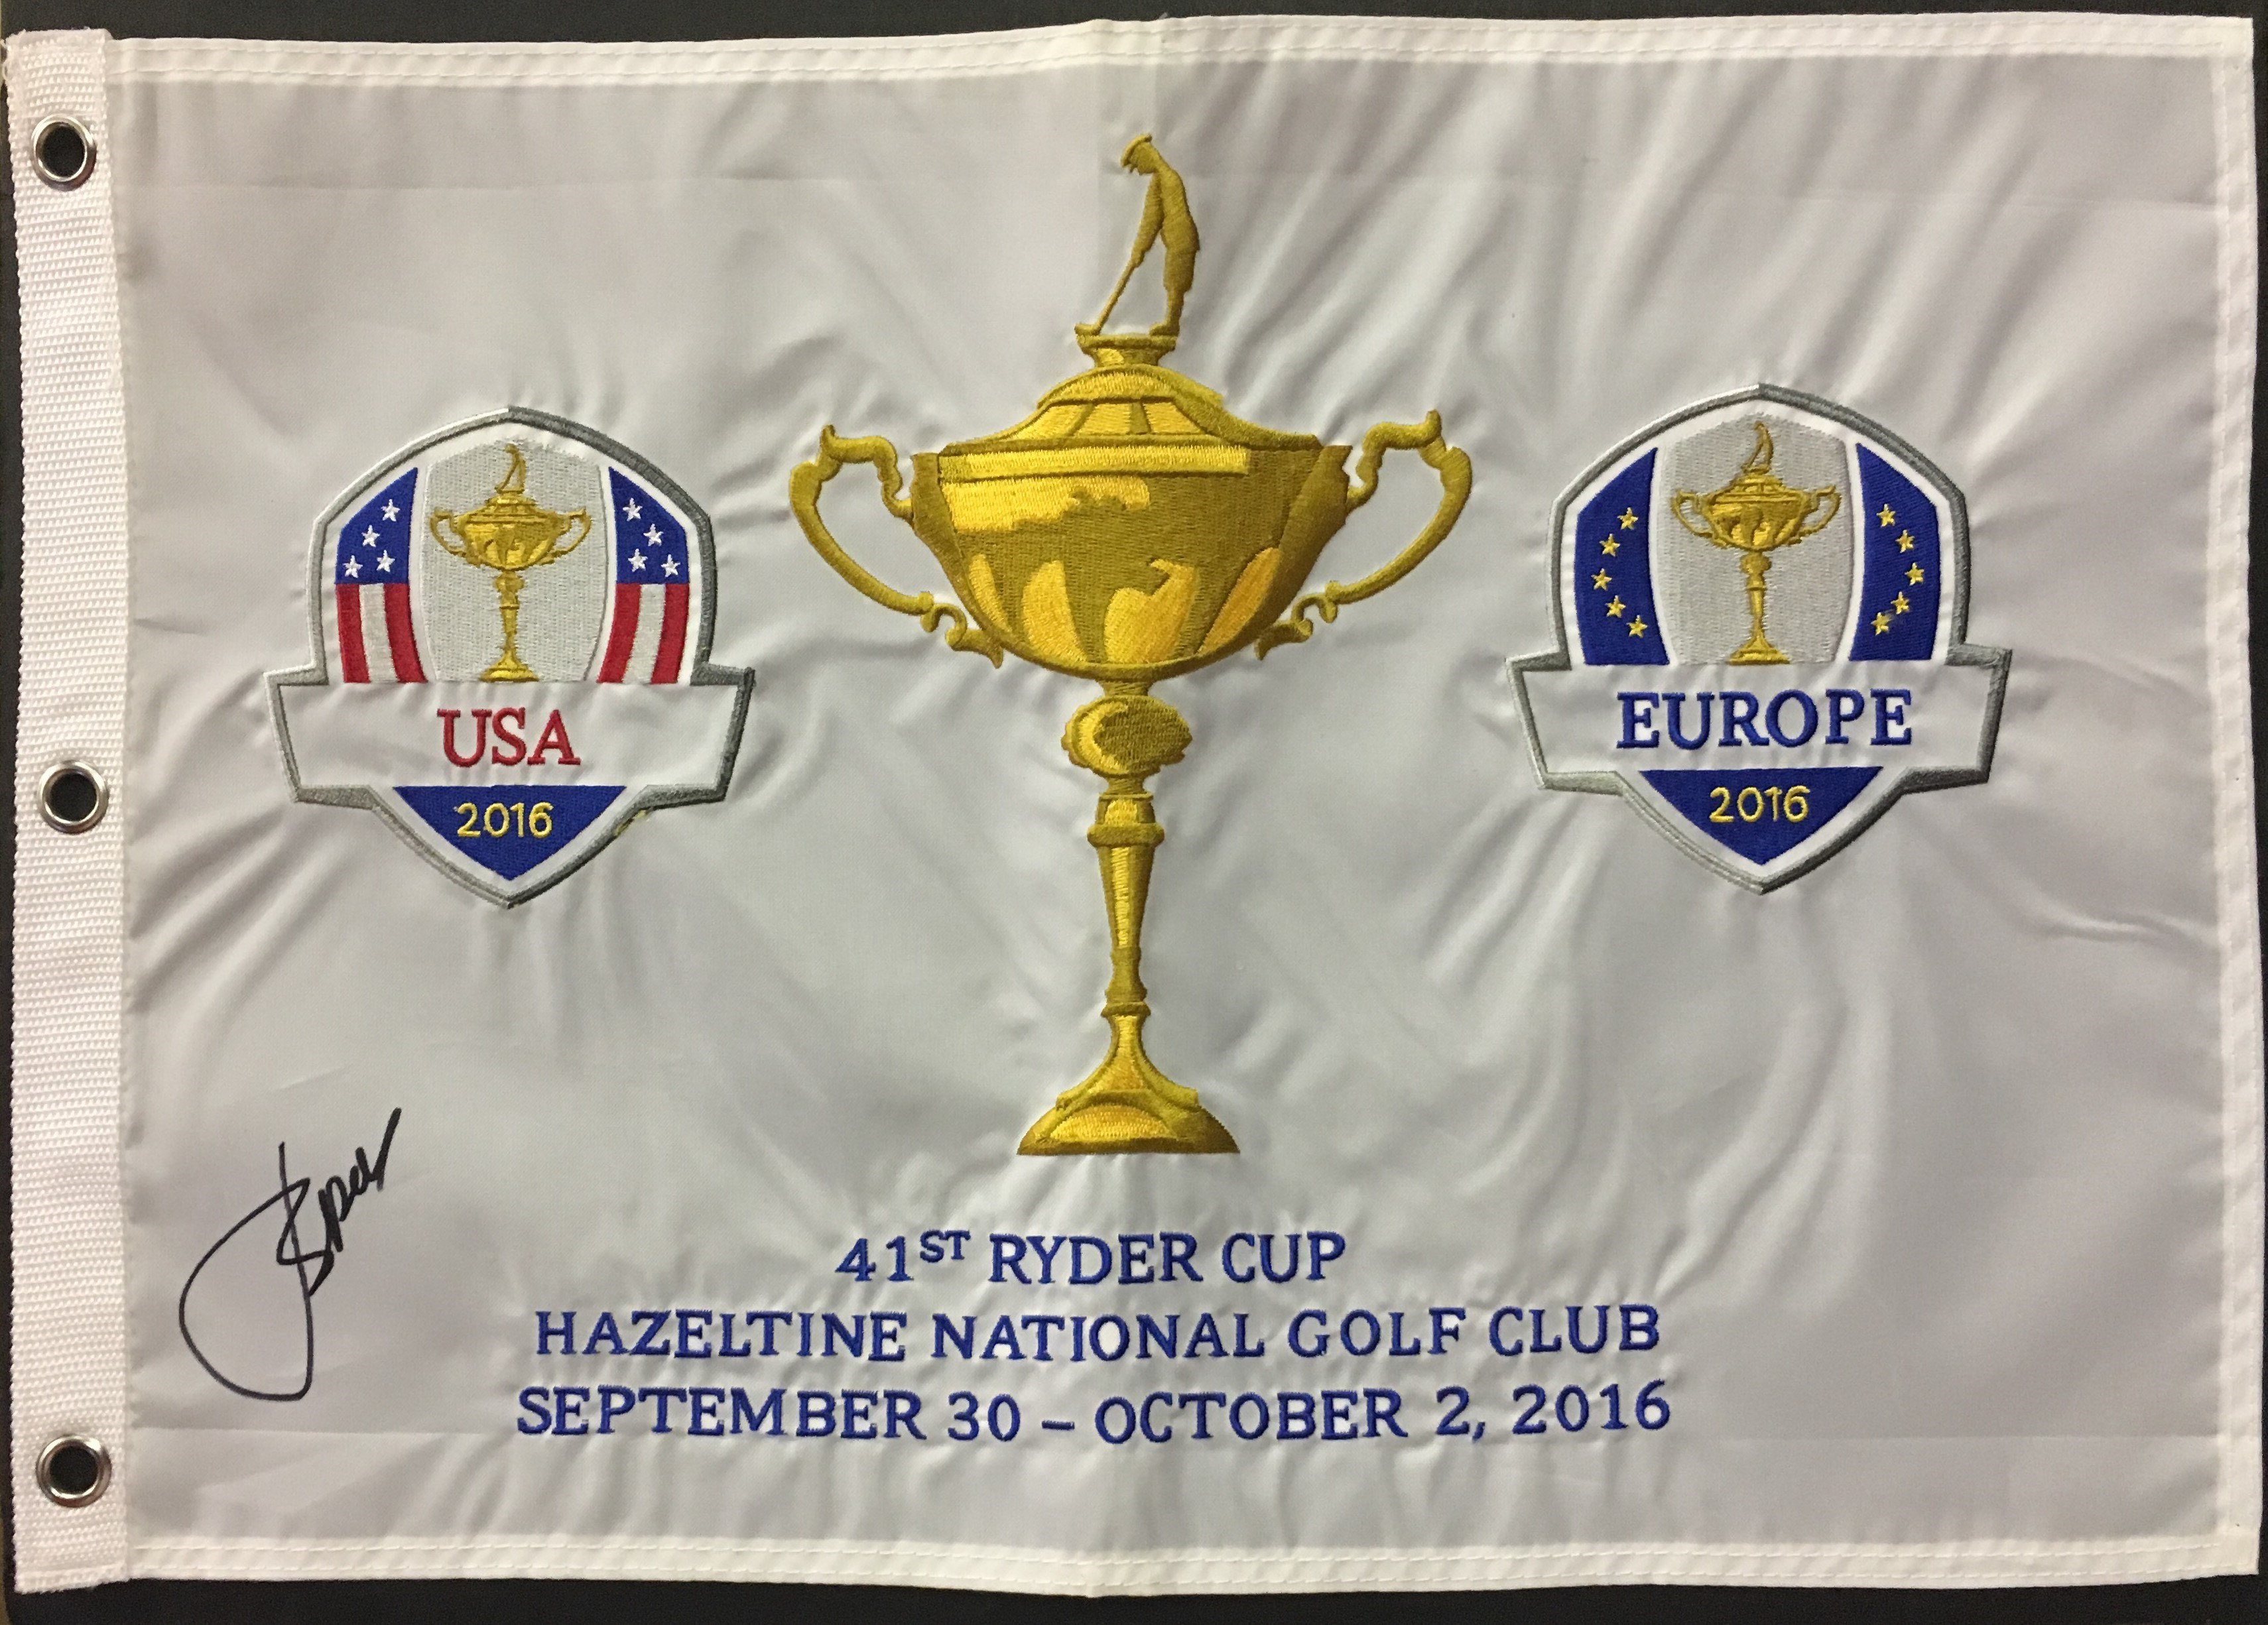 Olympics and All Sports - Jordan Spieth Signed 2016 Ryder Cup Flag